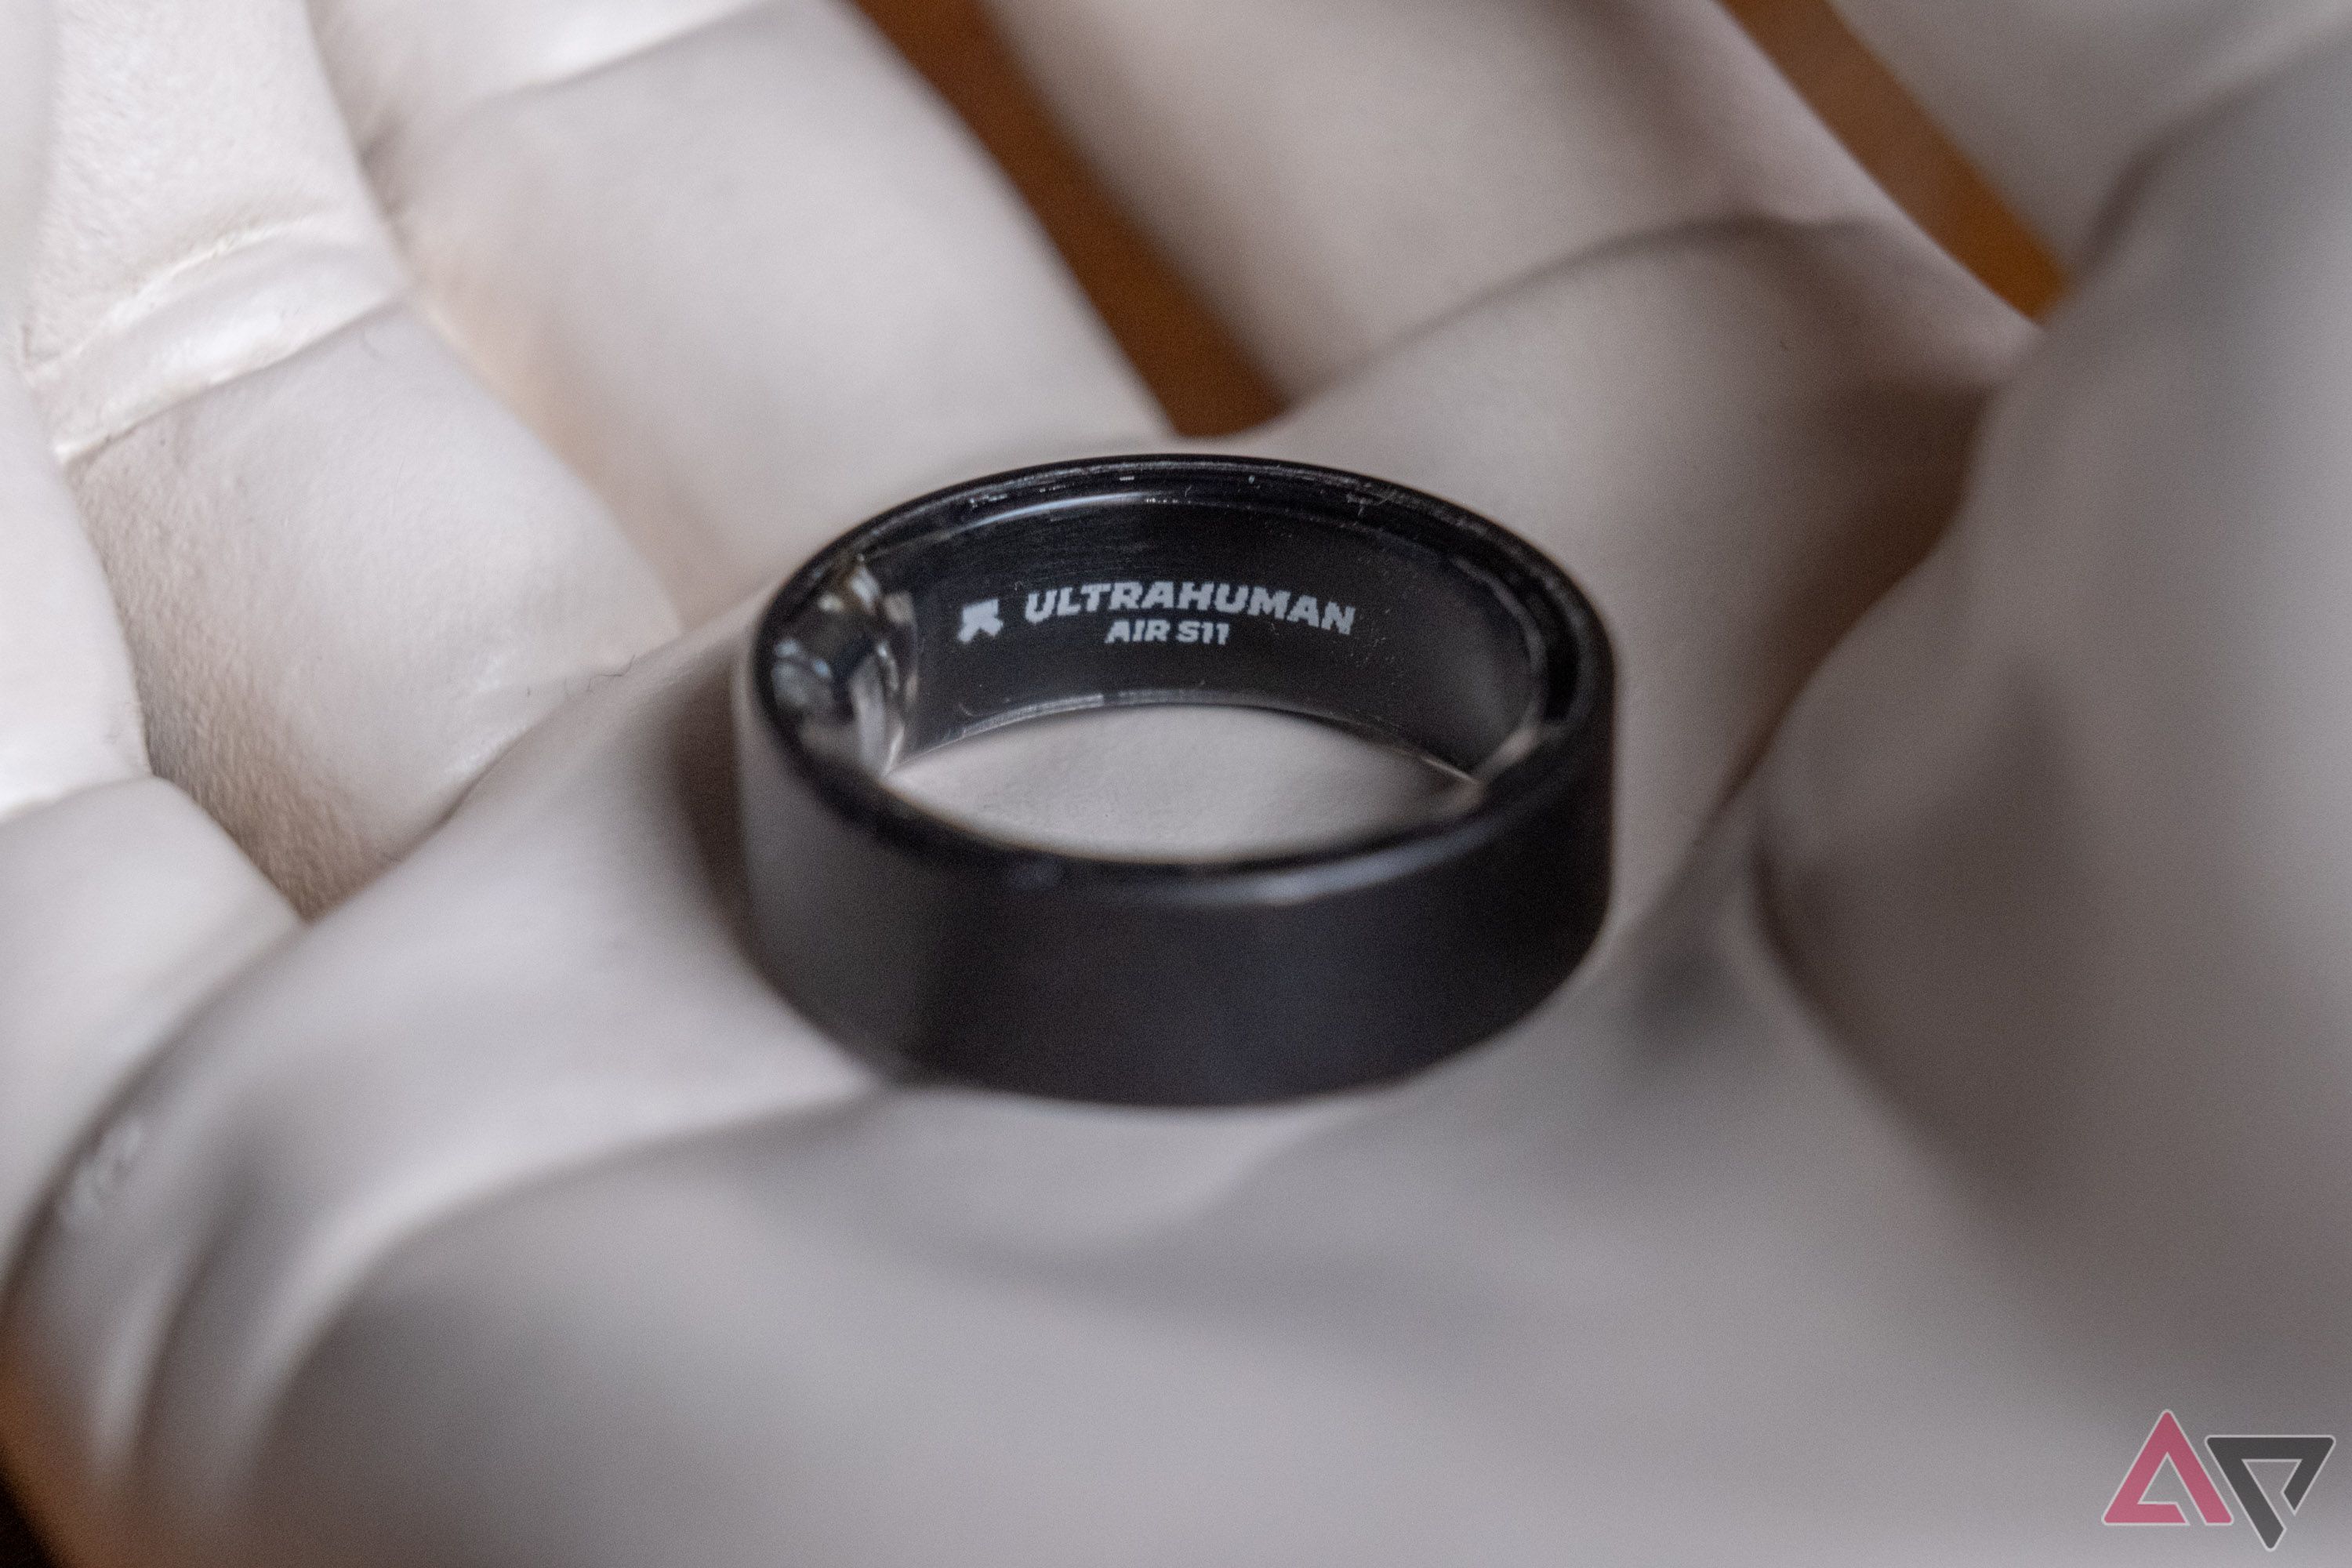 Ultrahuman Ring Air new lighter health-tracking wearable arrives -   News